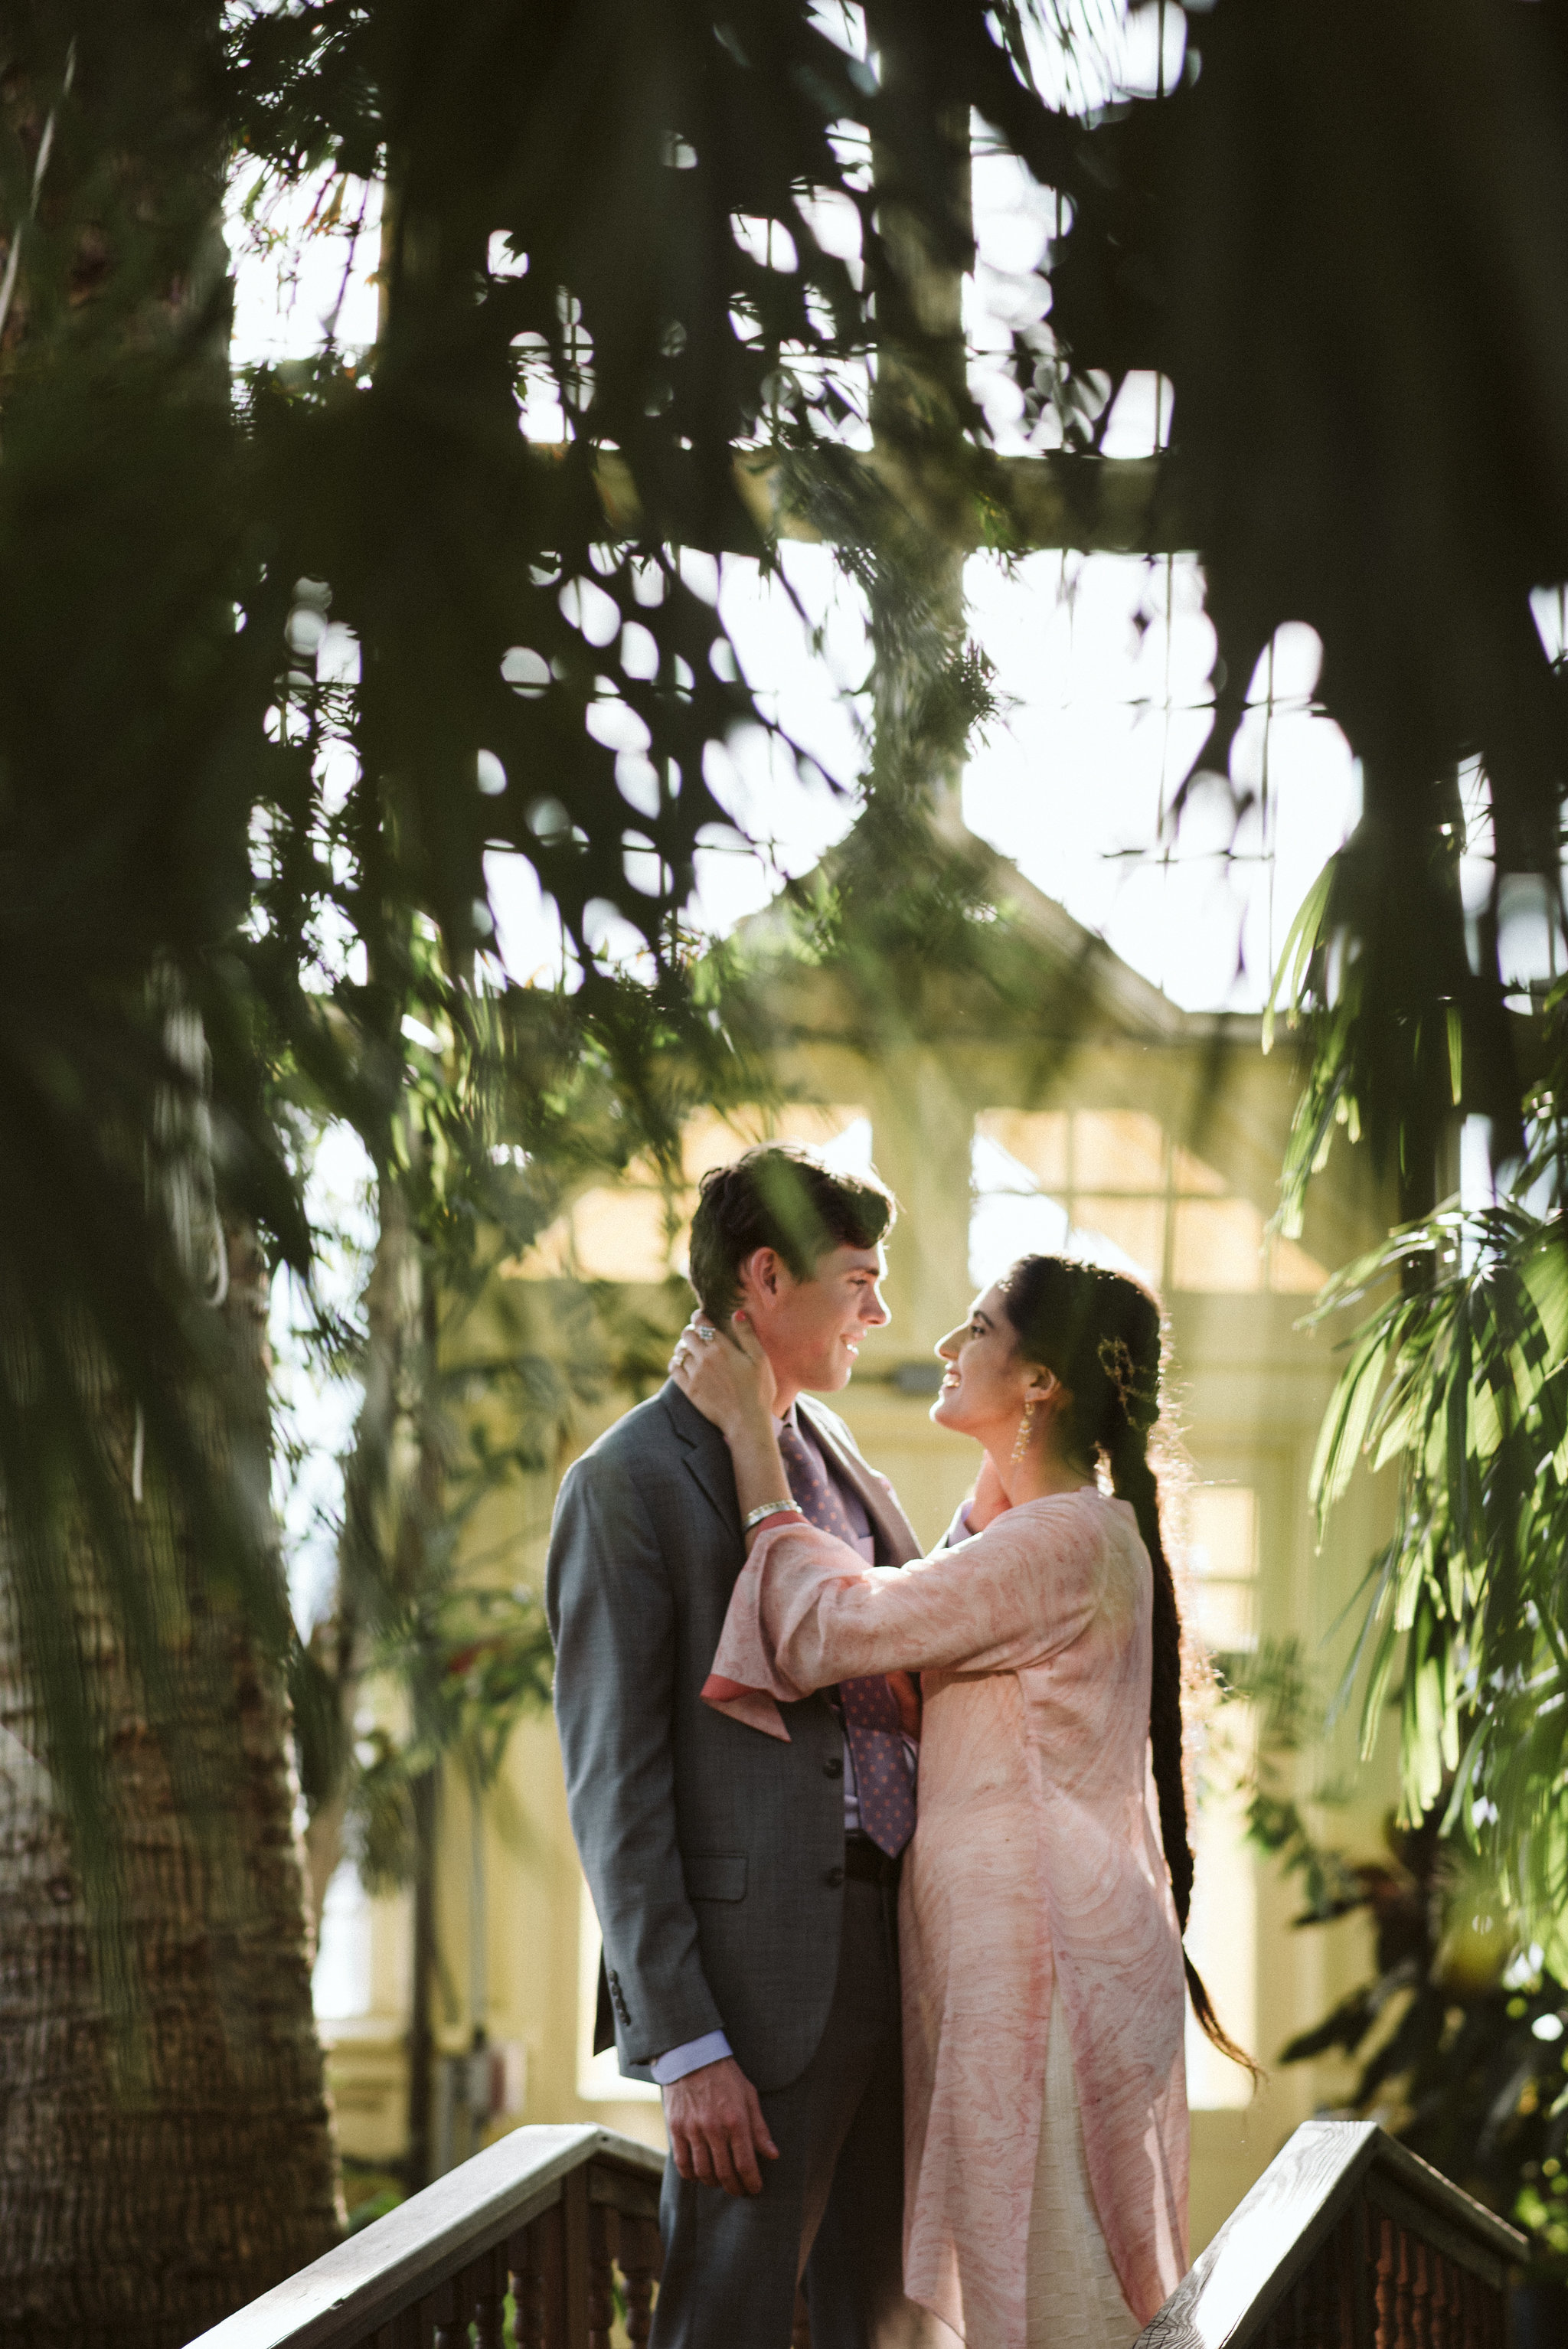 Elopement, Baltimore, Rawlings Conservatory, Greenhouse, Maryland Wedding Photographer, Indian American, Nature, Romantic, Garden, Pink Sari, Braids, Bride and Groom Hugging, Candid Photo